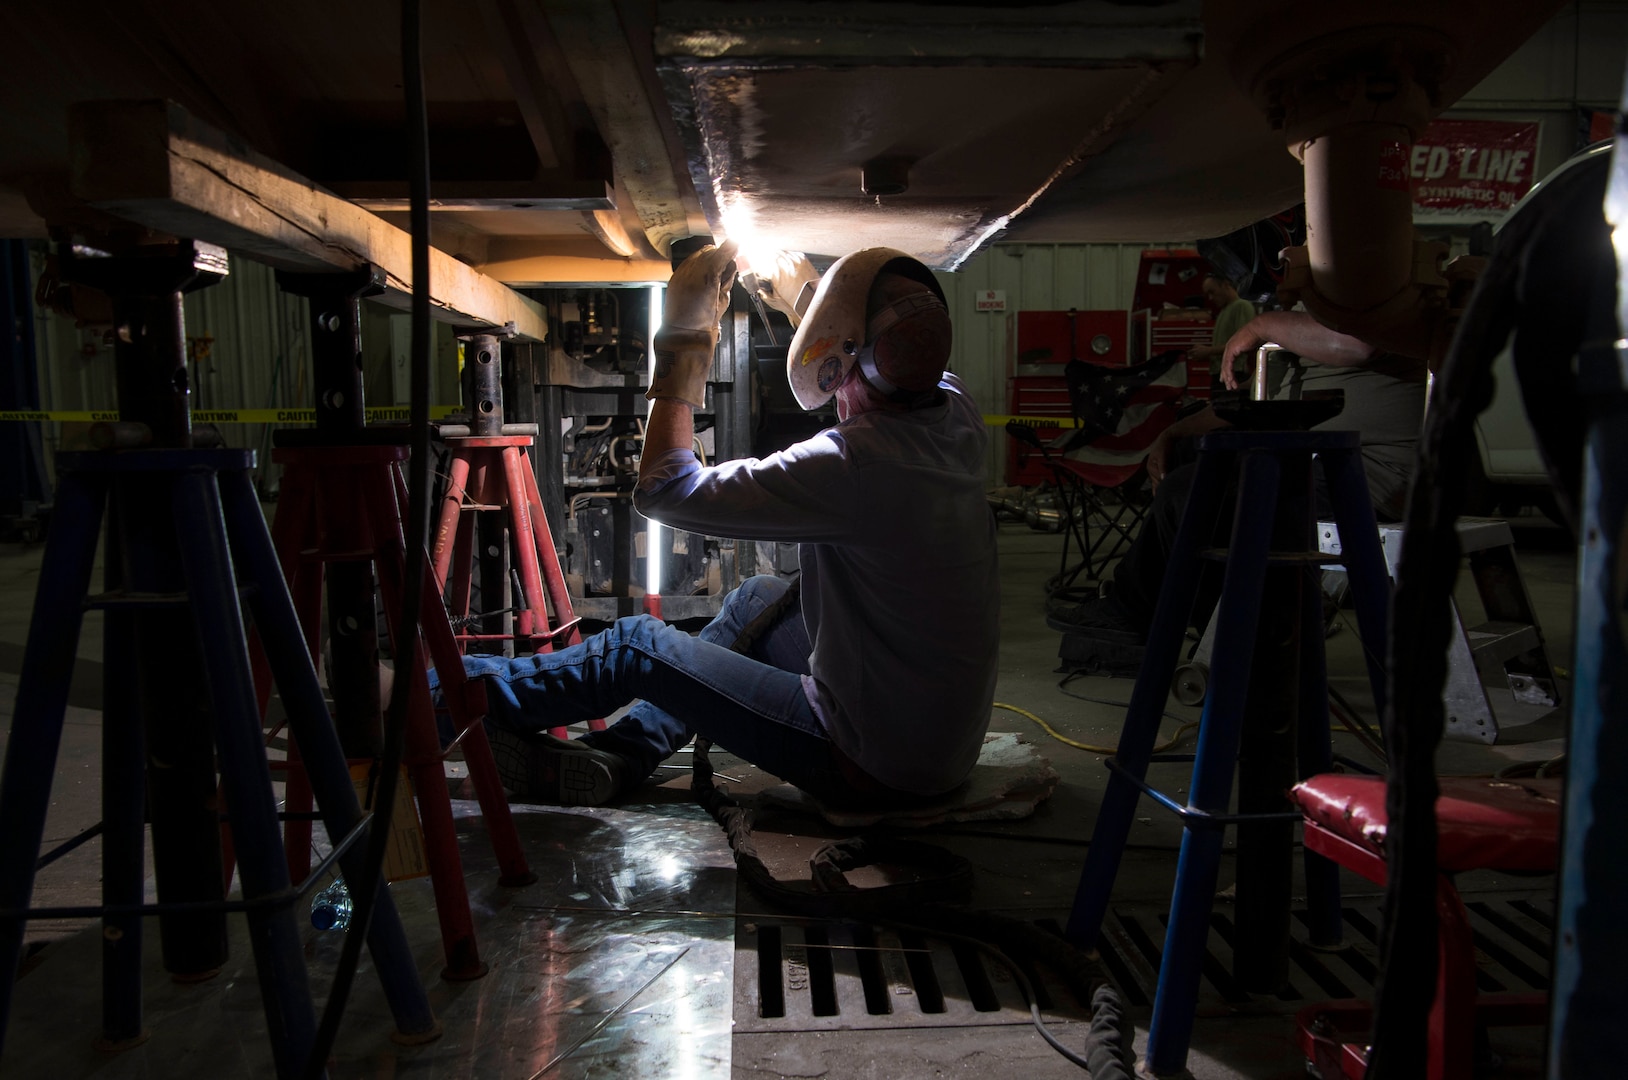 Mark Flannery, a welder from Detachment 6 at Al Udeid Air Base, Qatar, welds a steel plate to the bottom of a Jet Petroleum 8 tank in a vehicle management garage at an undisclosed location in Southwest Asia, April 27, 2018. Flannery was hand selected to come and repair the tank. (U.S. Air Force photo by Staff Sgt. Joshua King)